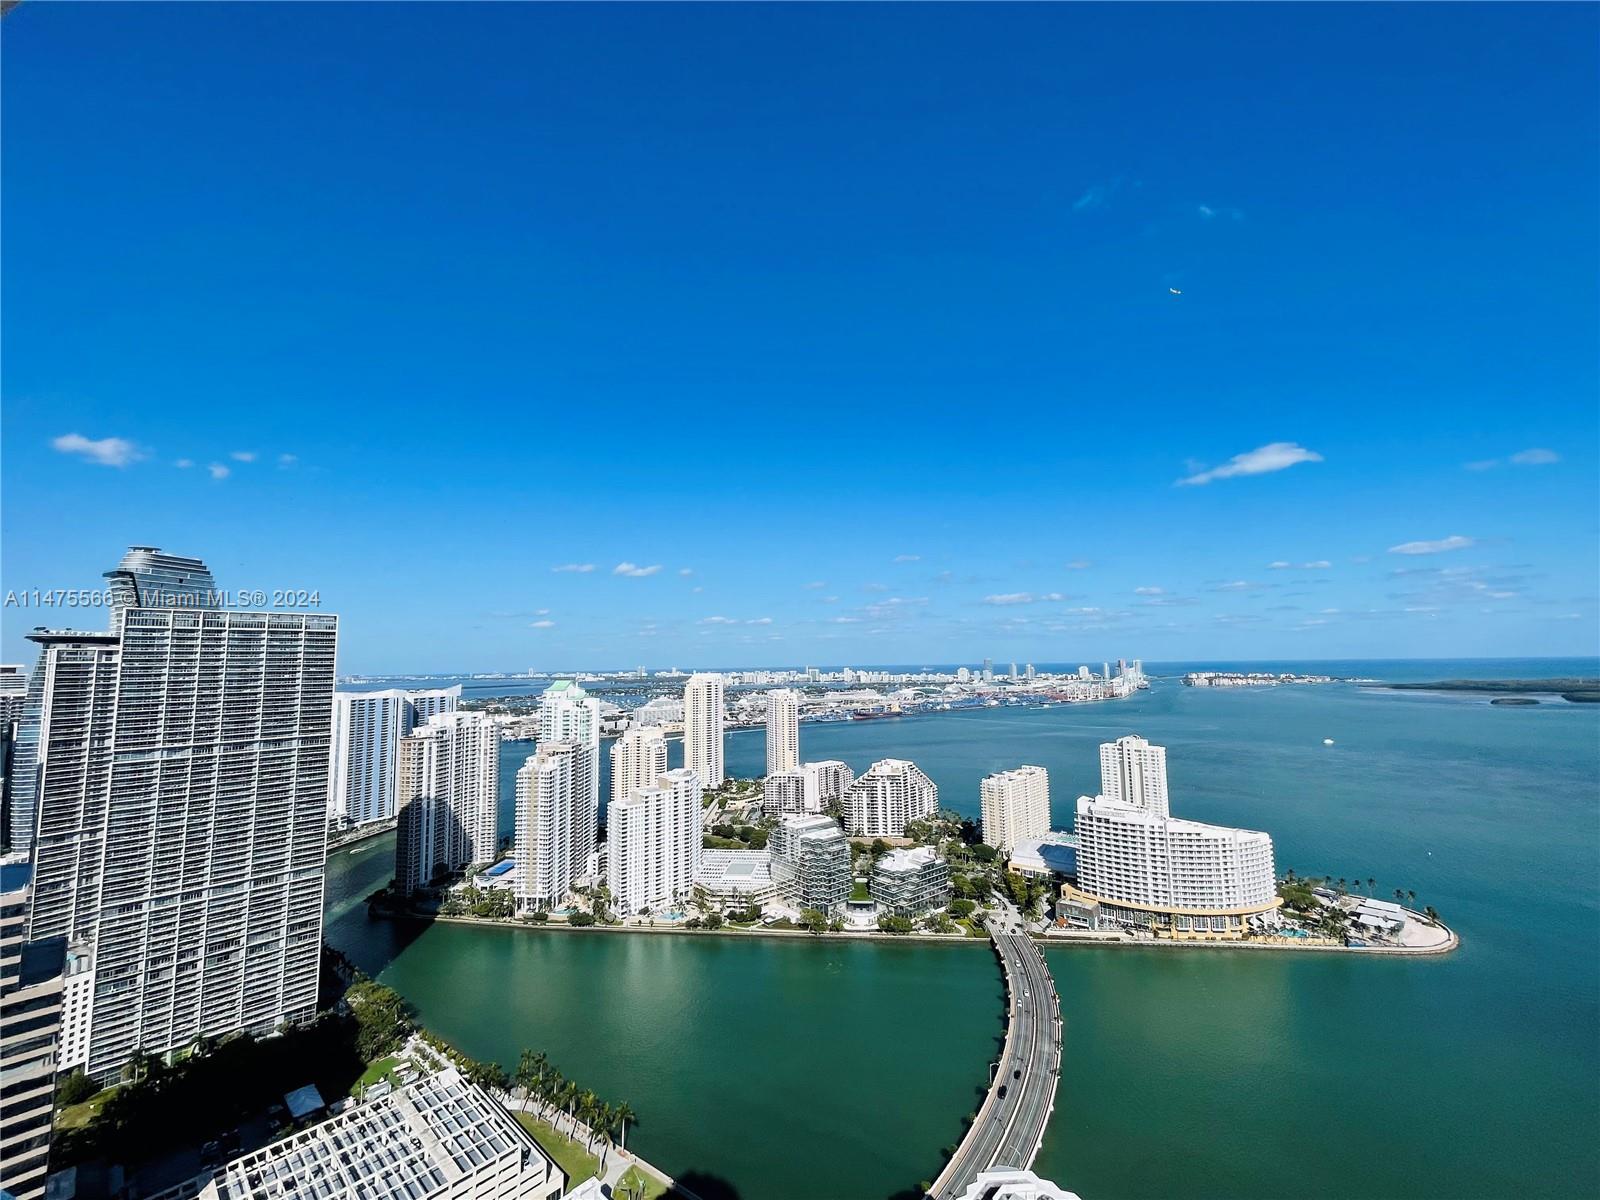 Amazing 2 /2 .5 bath unit with direct Biscayne Bay views on the 52nd floor. Vary spacious unit with 2 walk in closets. Unit has modern porcelain floors throughout. Residence features GE Monogram  & Bosch stainless steel appliances, high foot ceilings, imported italian cabinetry.  Fantastic amenities:24 hr security and concierge, 24 hour valet parking, State of the art Fitness Center in each tower, 2 Infinity-edge heated pools, Steam room,Theater room, Business center, party room, pool table, lounge and more. Walk to Mary Brickell Village and Brickell City Center mall. One assigned covered parking space. HOA includes water, basic cable & internet.